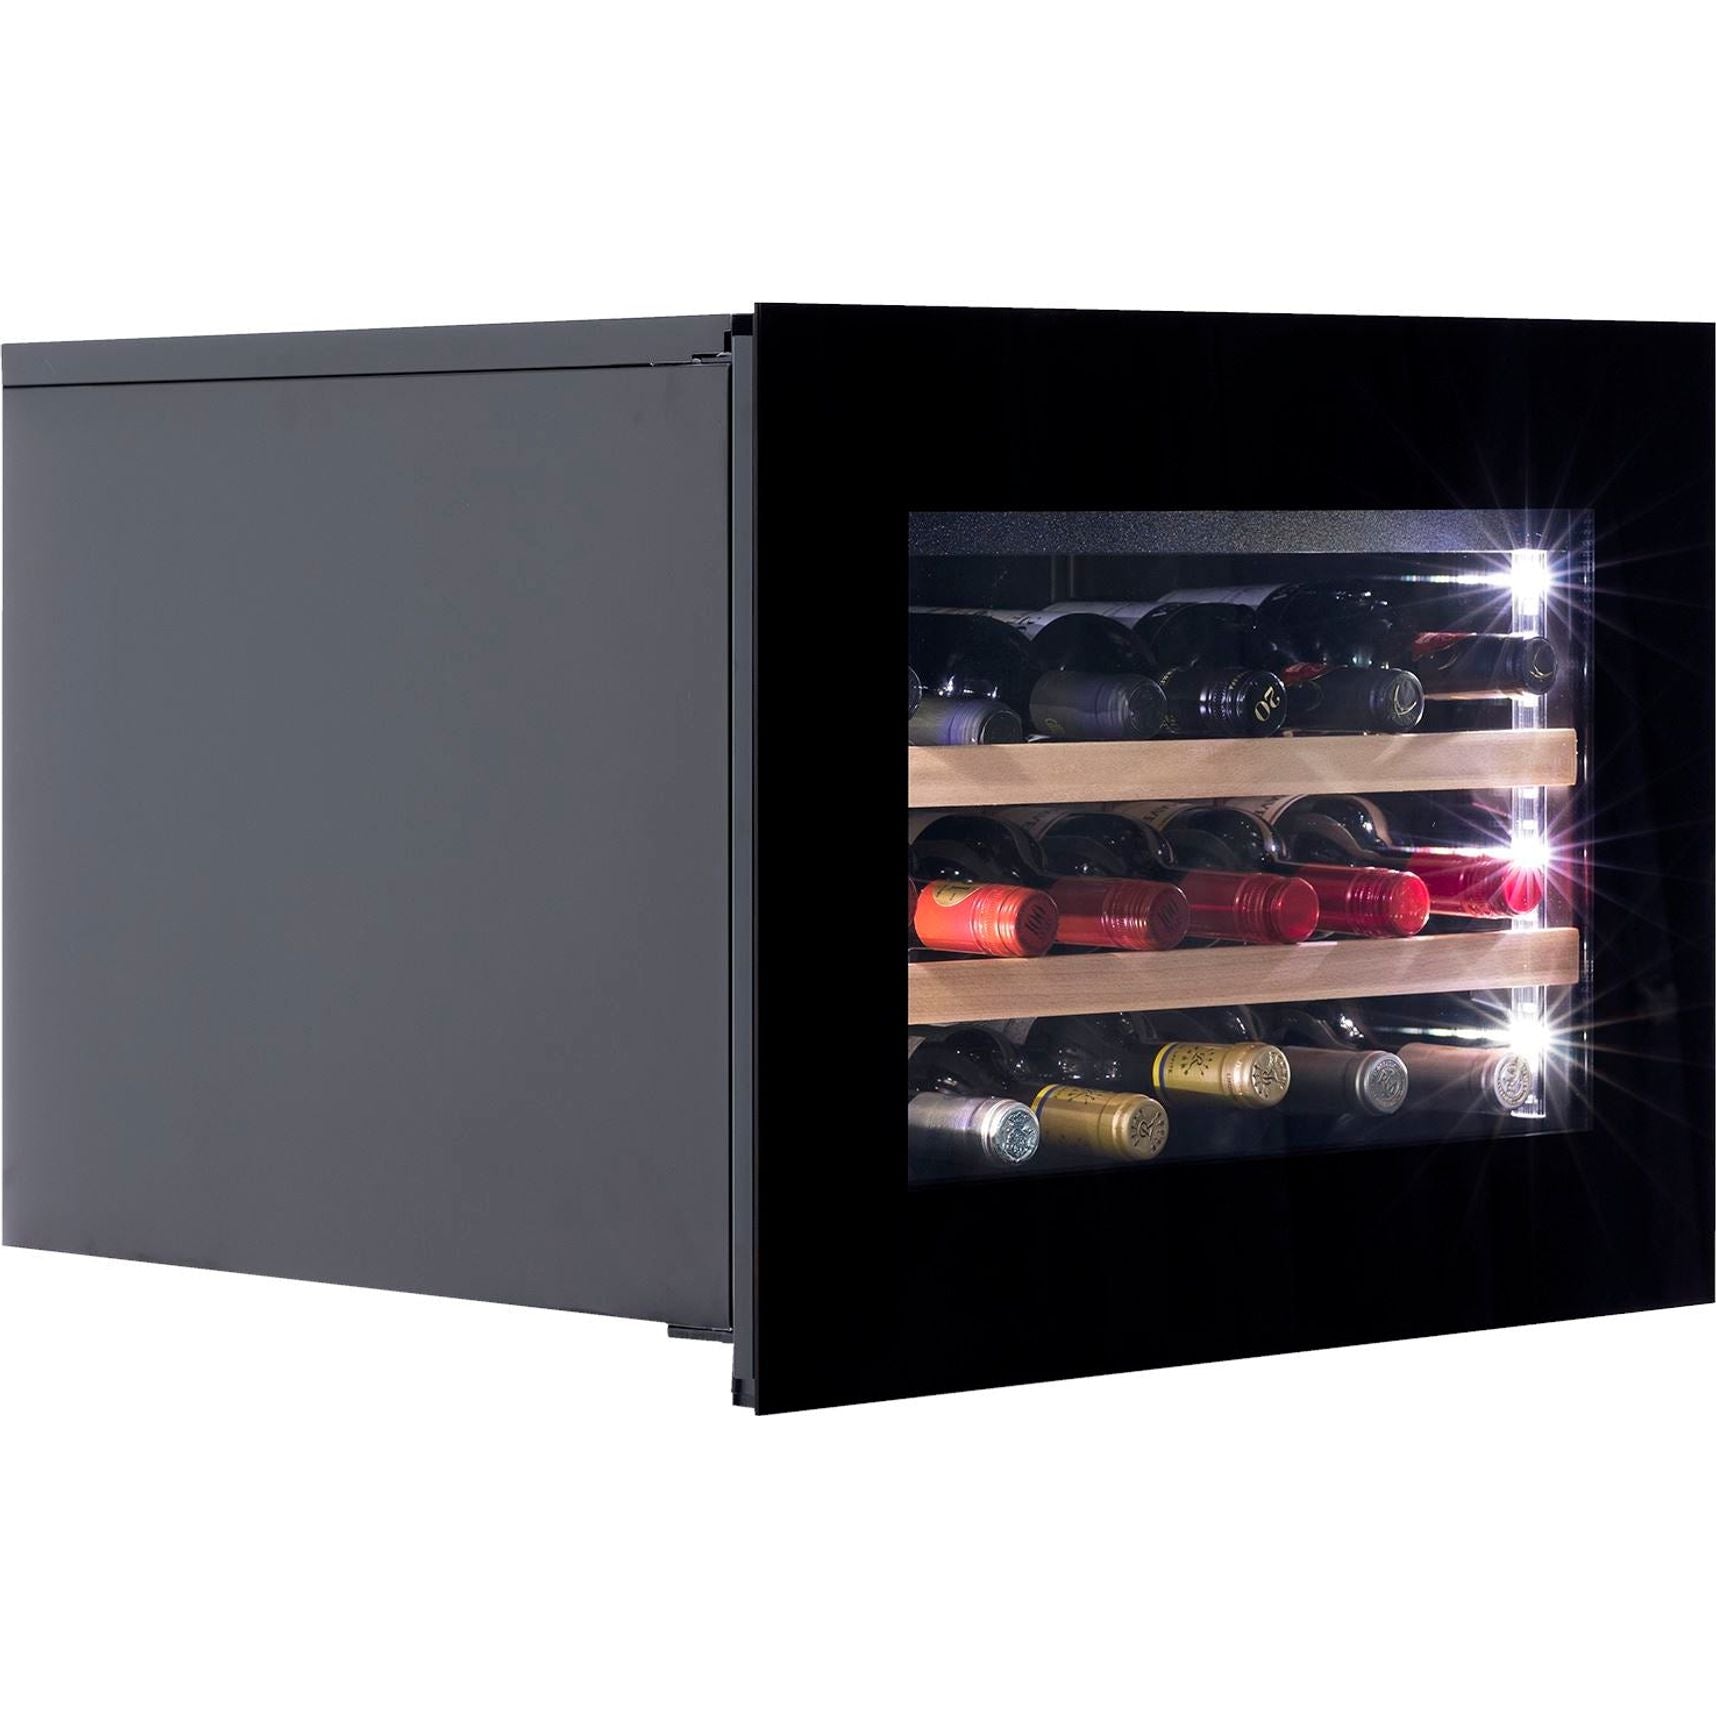 Dunavox GLANCE-18 - Single Zone 18 Bottle - Built In / Integrated Wine Cooler - DAVG-18.46B.TO